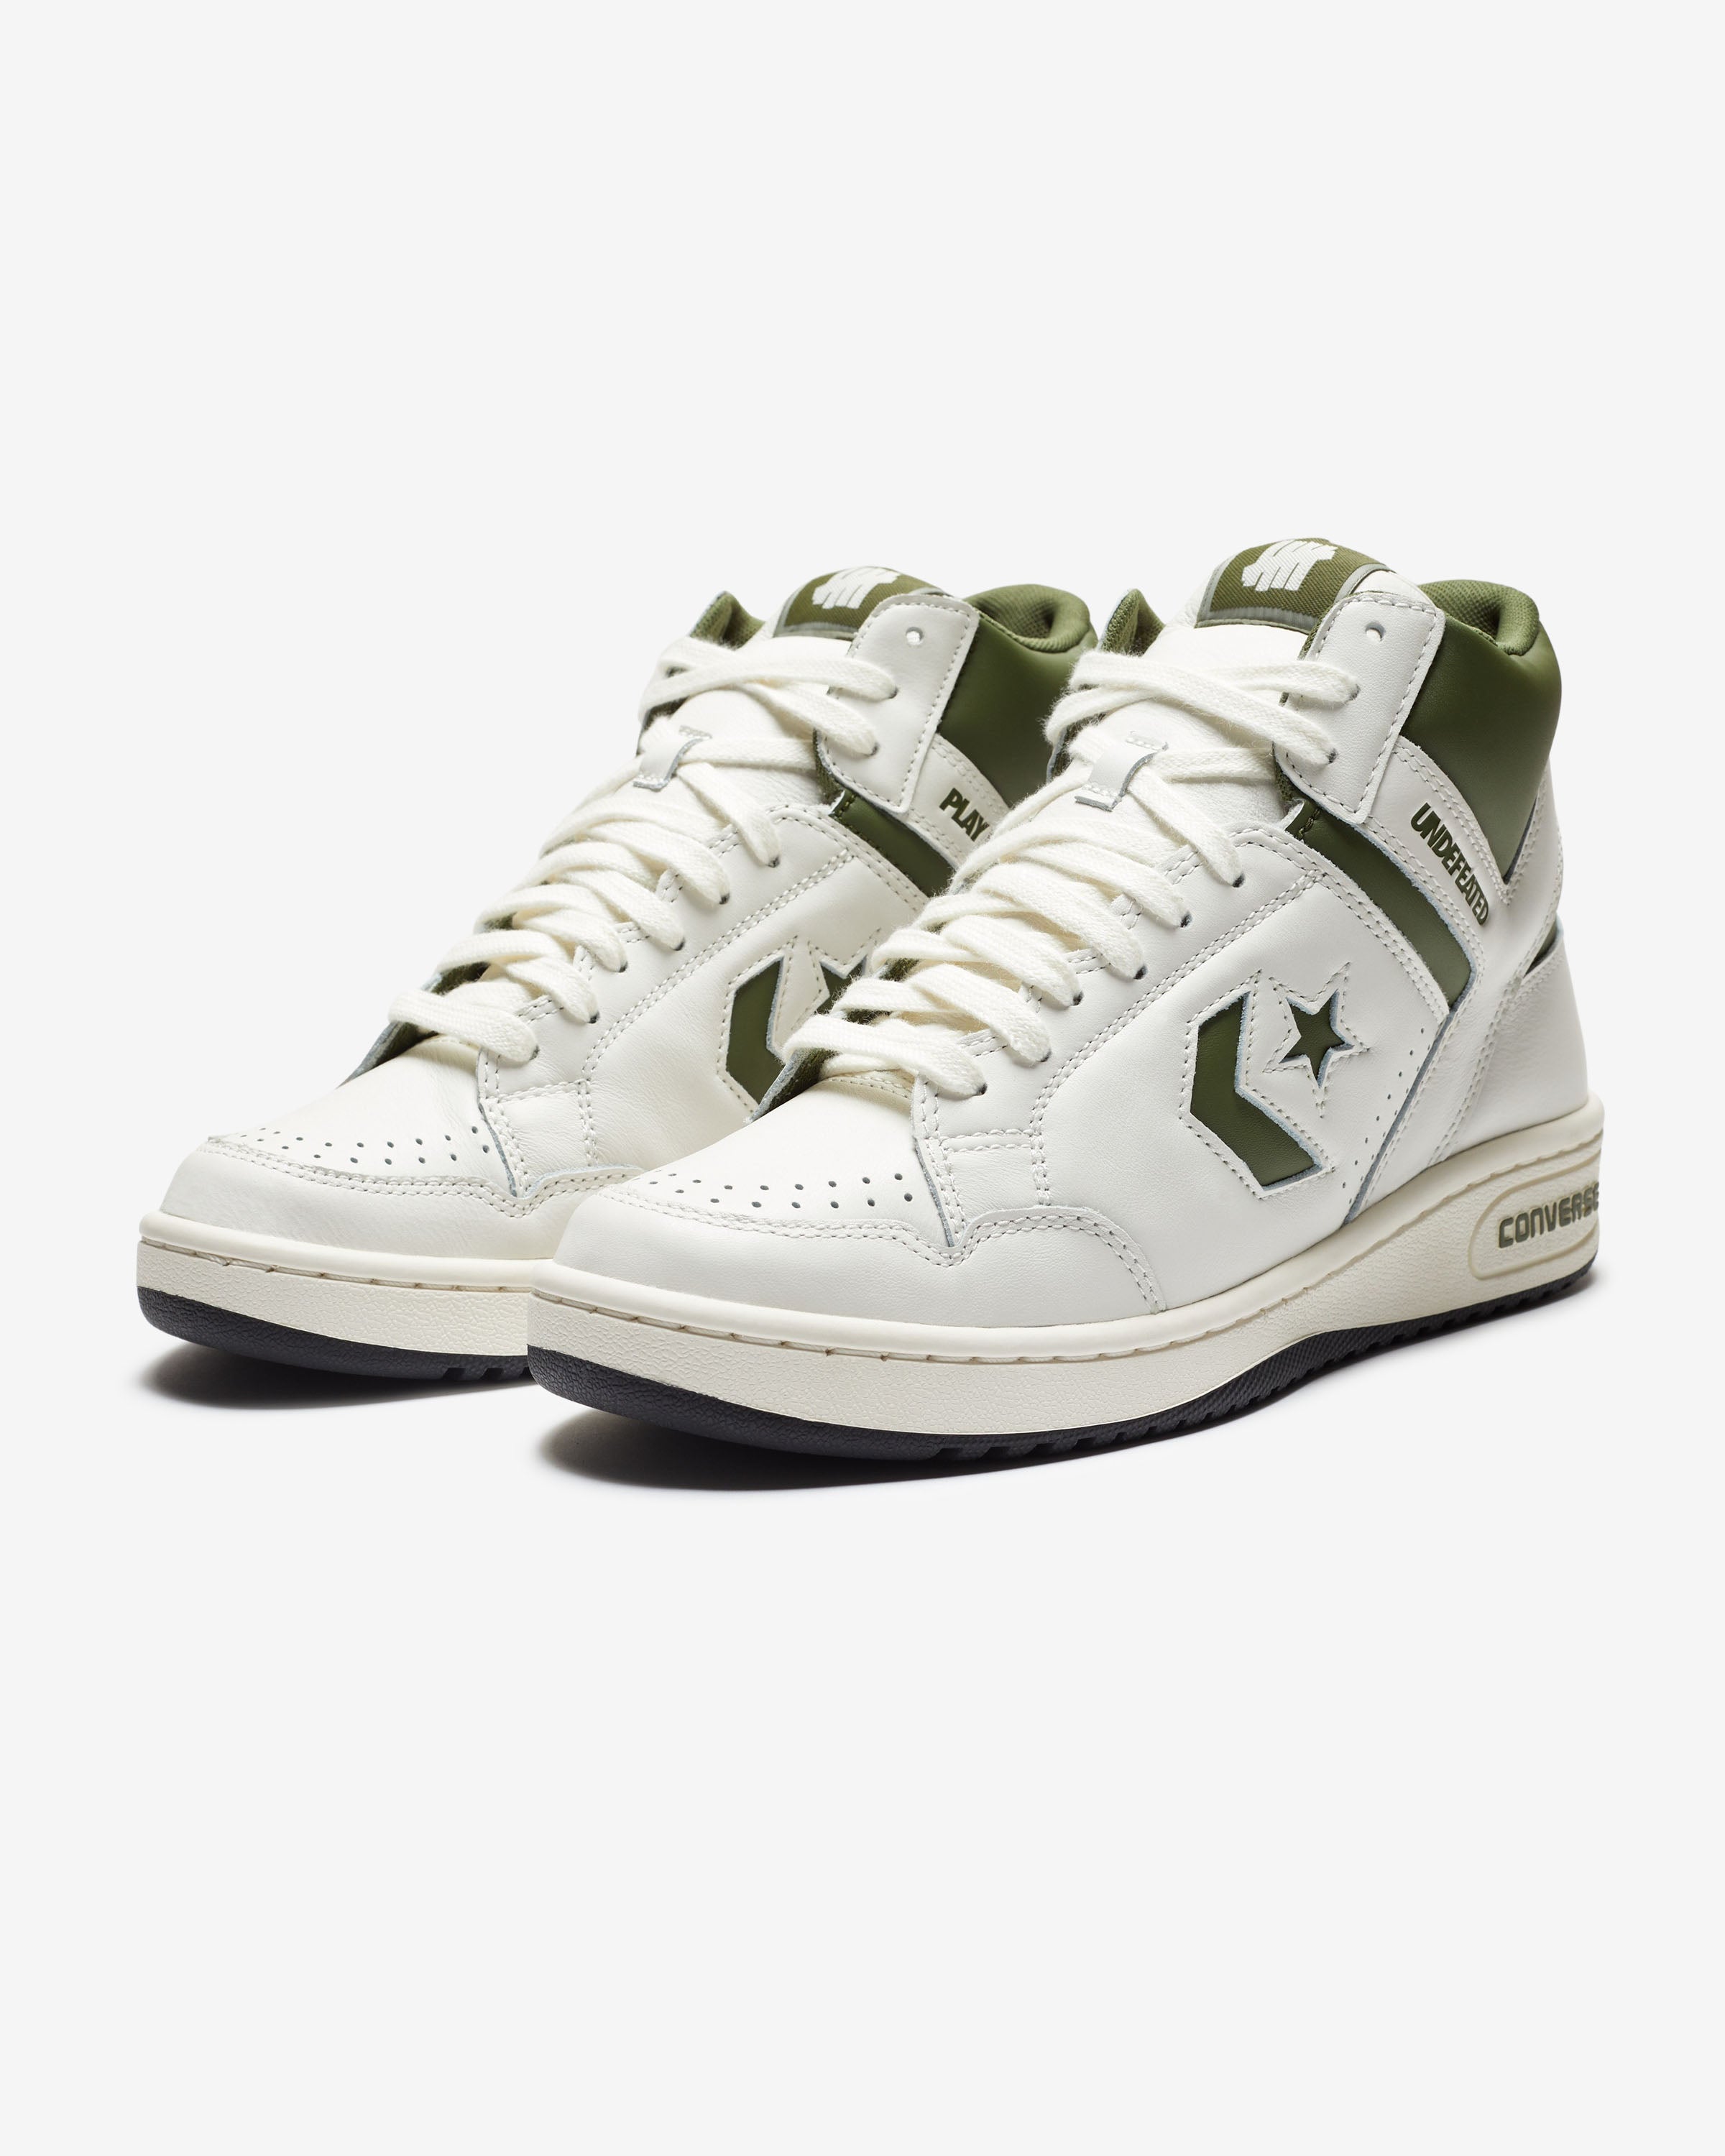 X CONVERSE MID - CHIVE – Undefeated